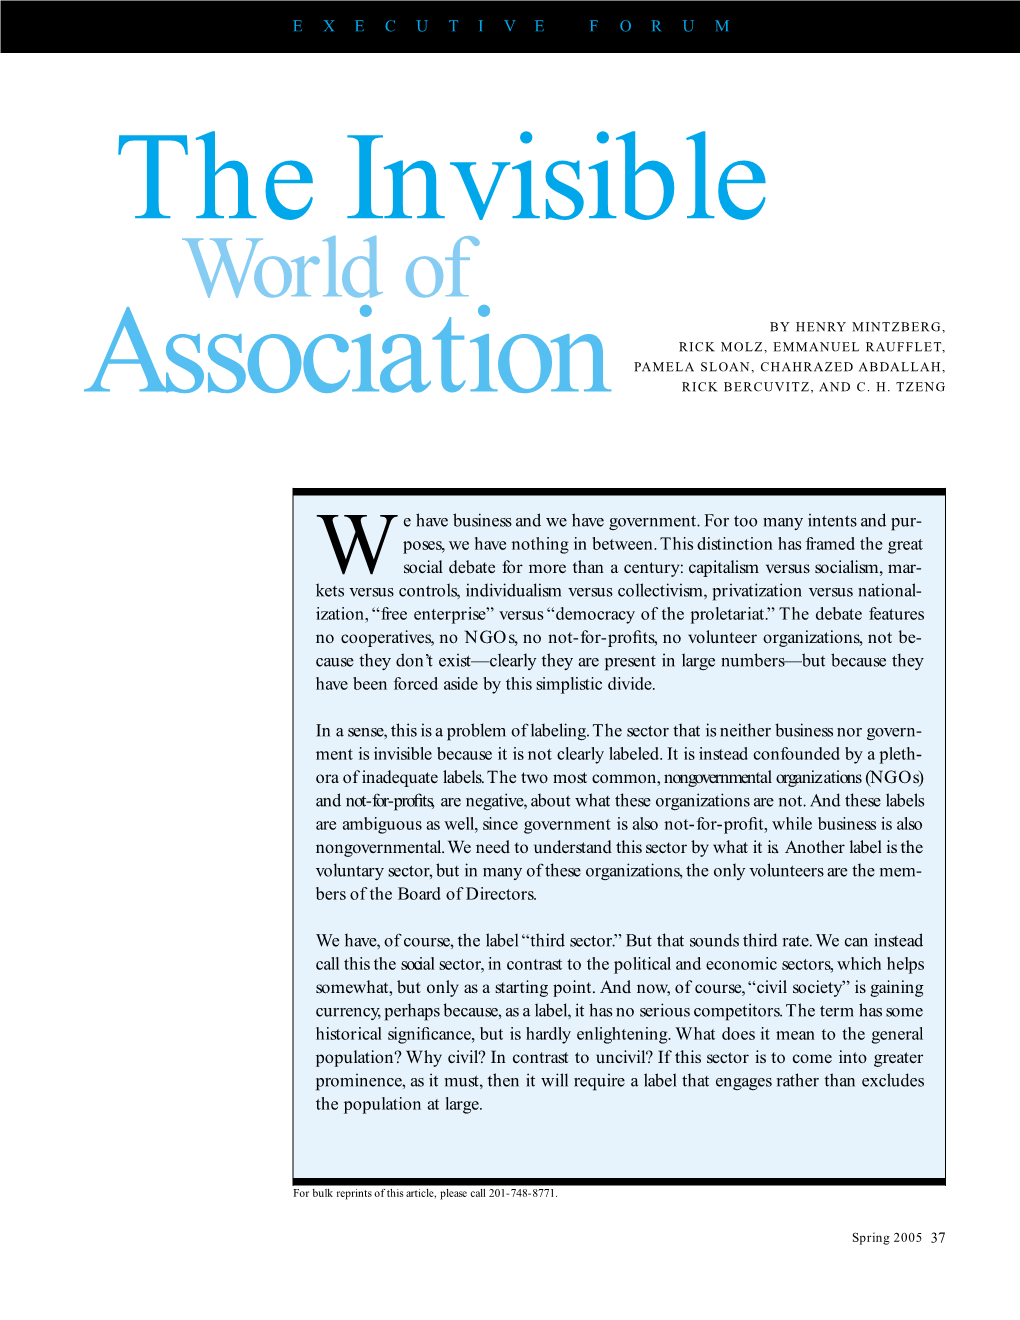 The Invisible World of Association